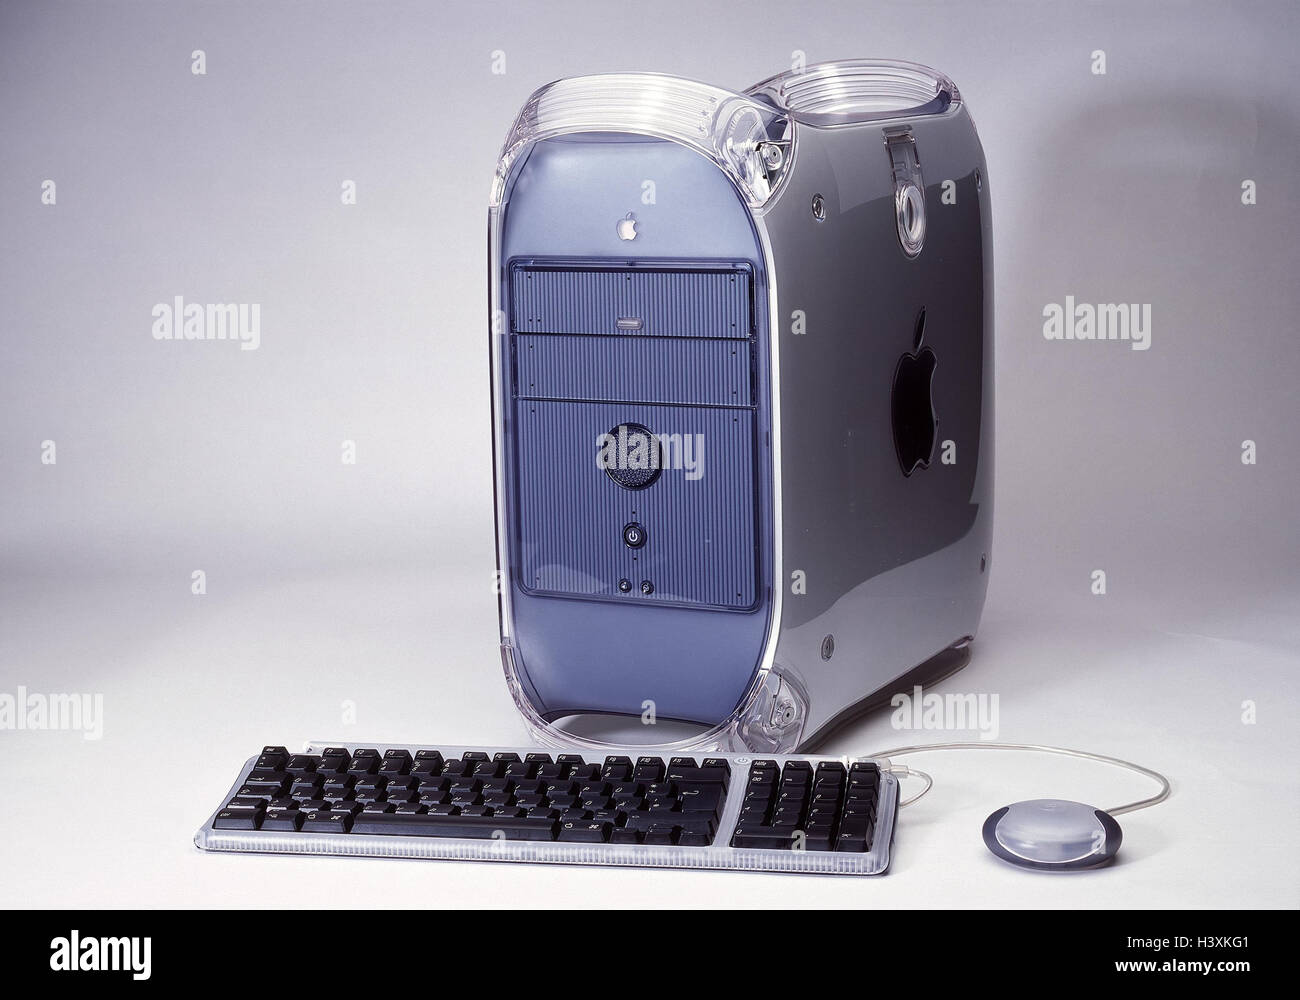 Computer Apple Macintosh G4, computer, keyboard, Mouse, data-processing system, studio, cut out, product photography, Still life Stock Photo